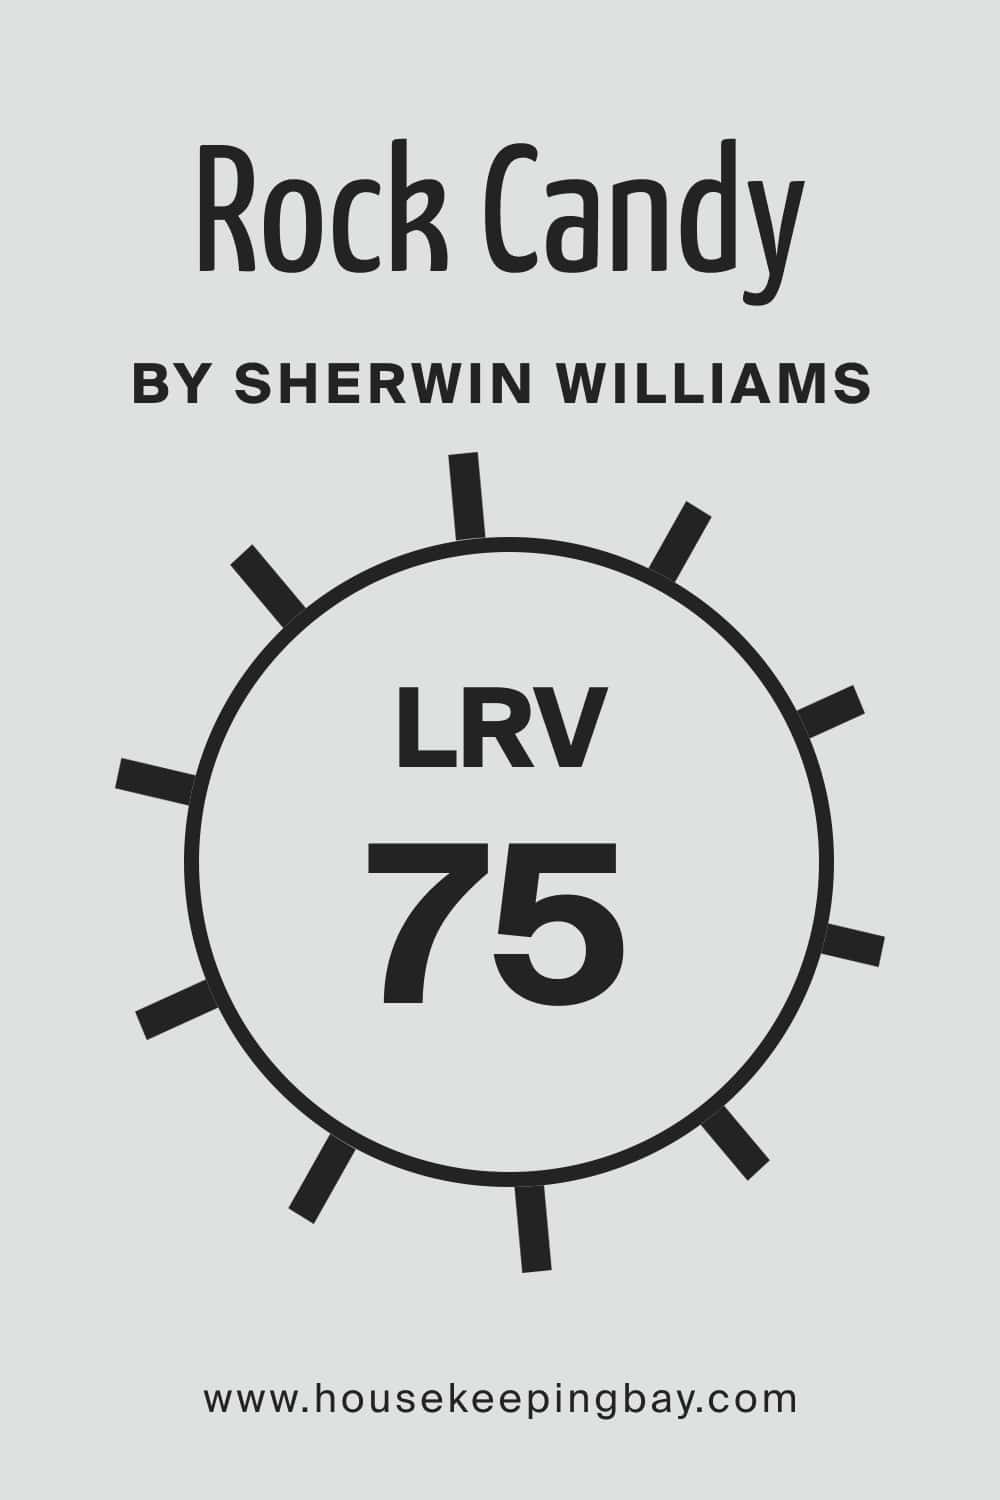 Rock Candy LRV is 75